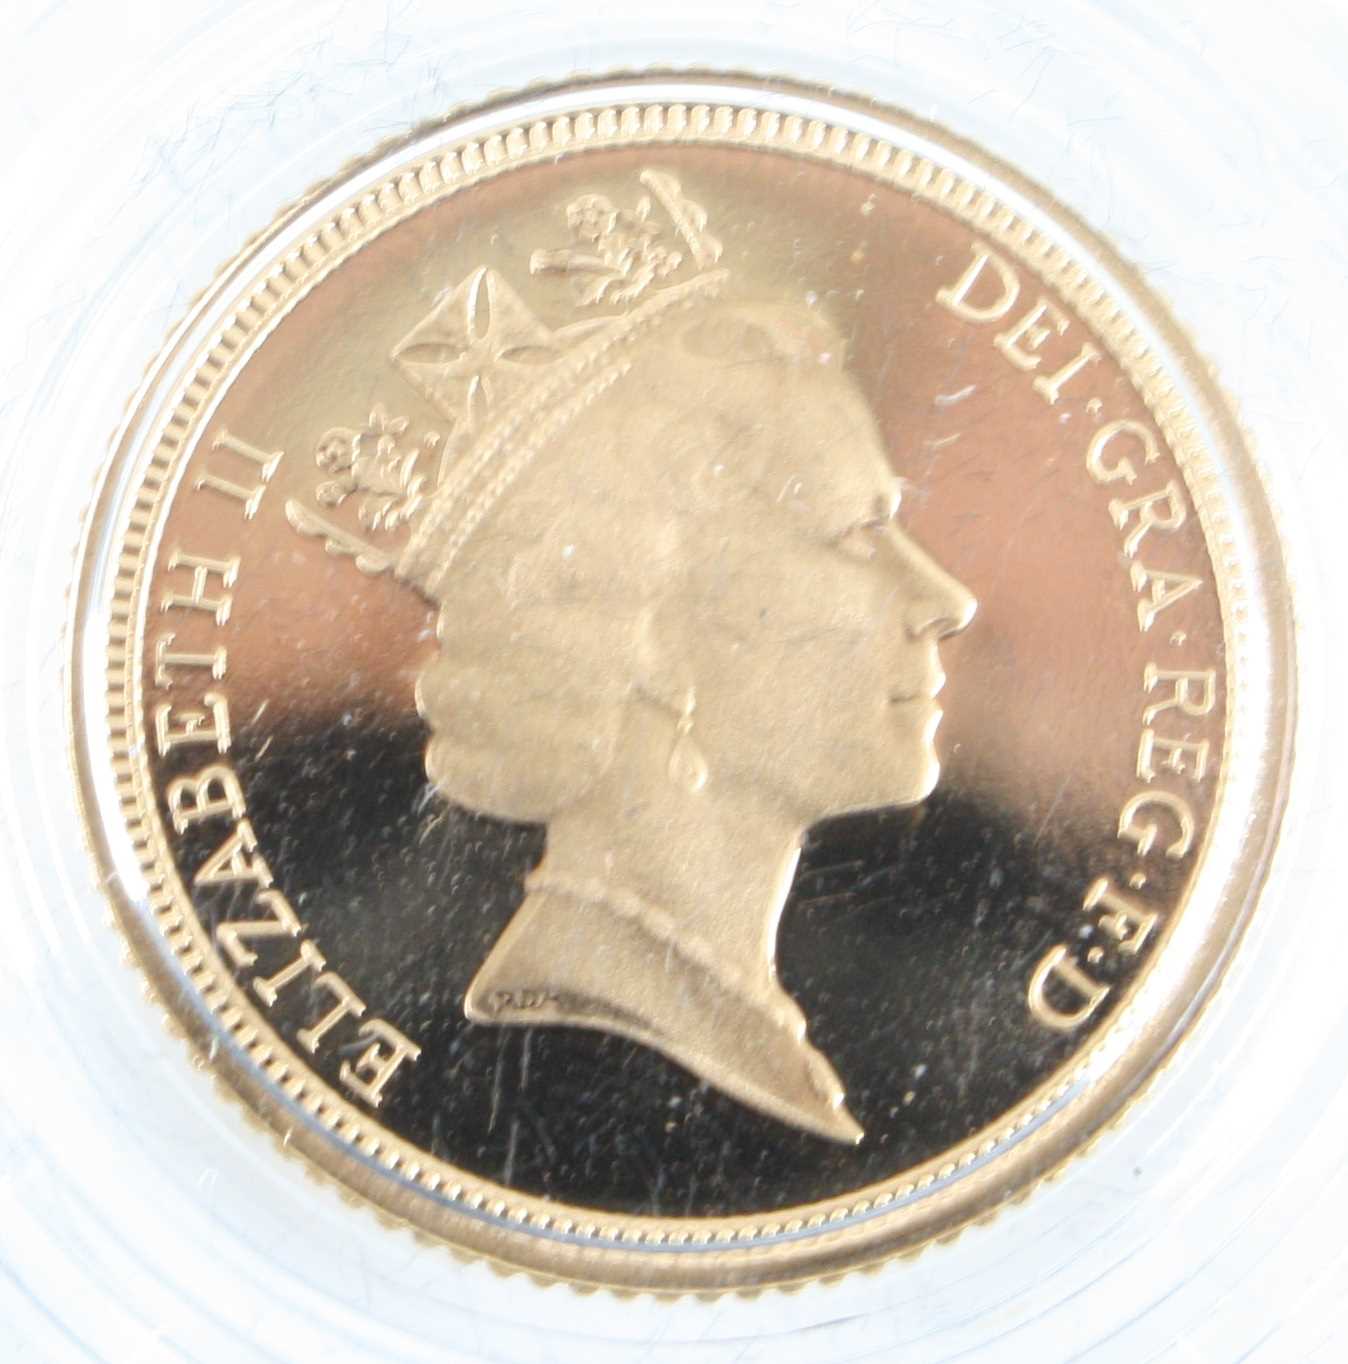 Great Britain, 1995 gold proof half sovereign, Elizabeth II, rev; St George and Dragon above date, - Image 2 of 3